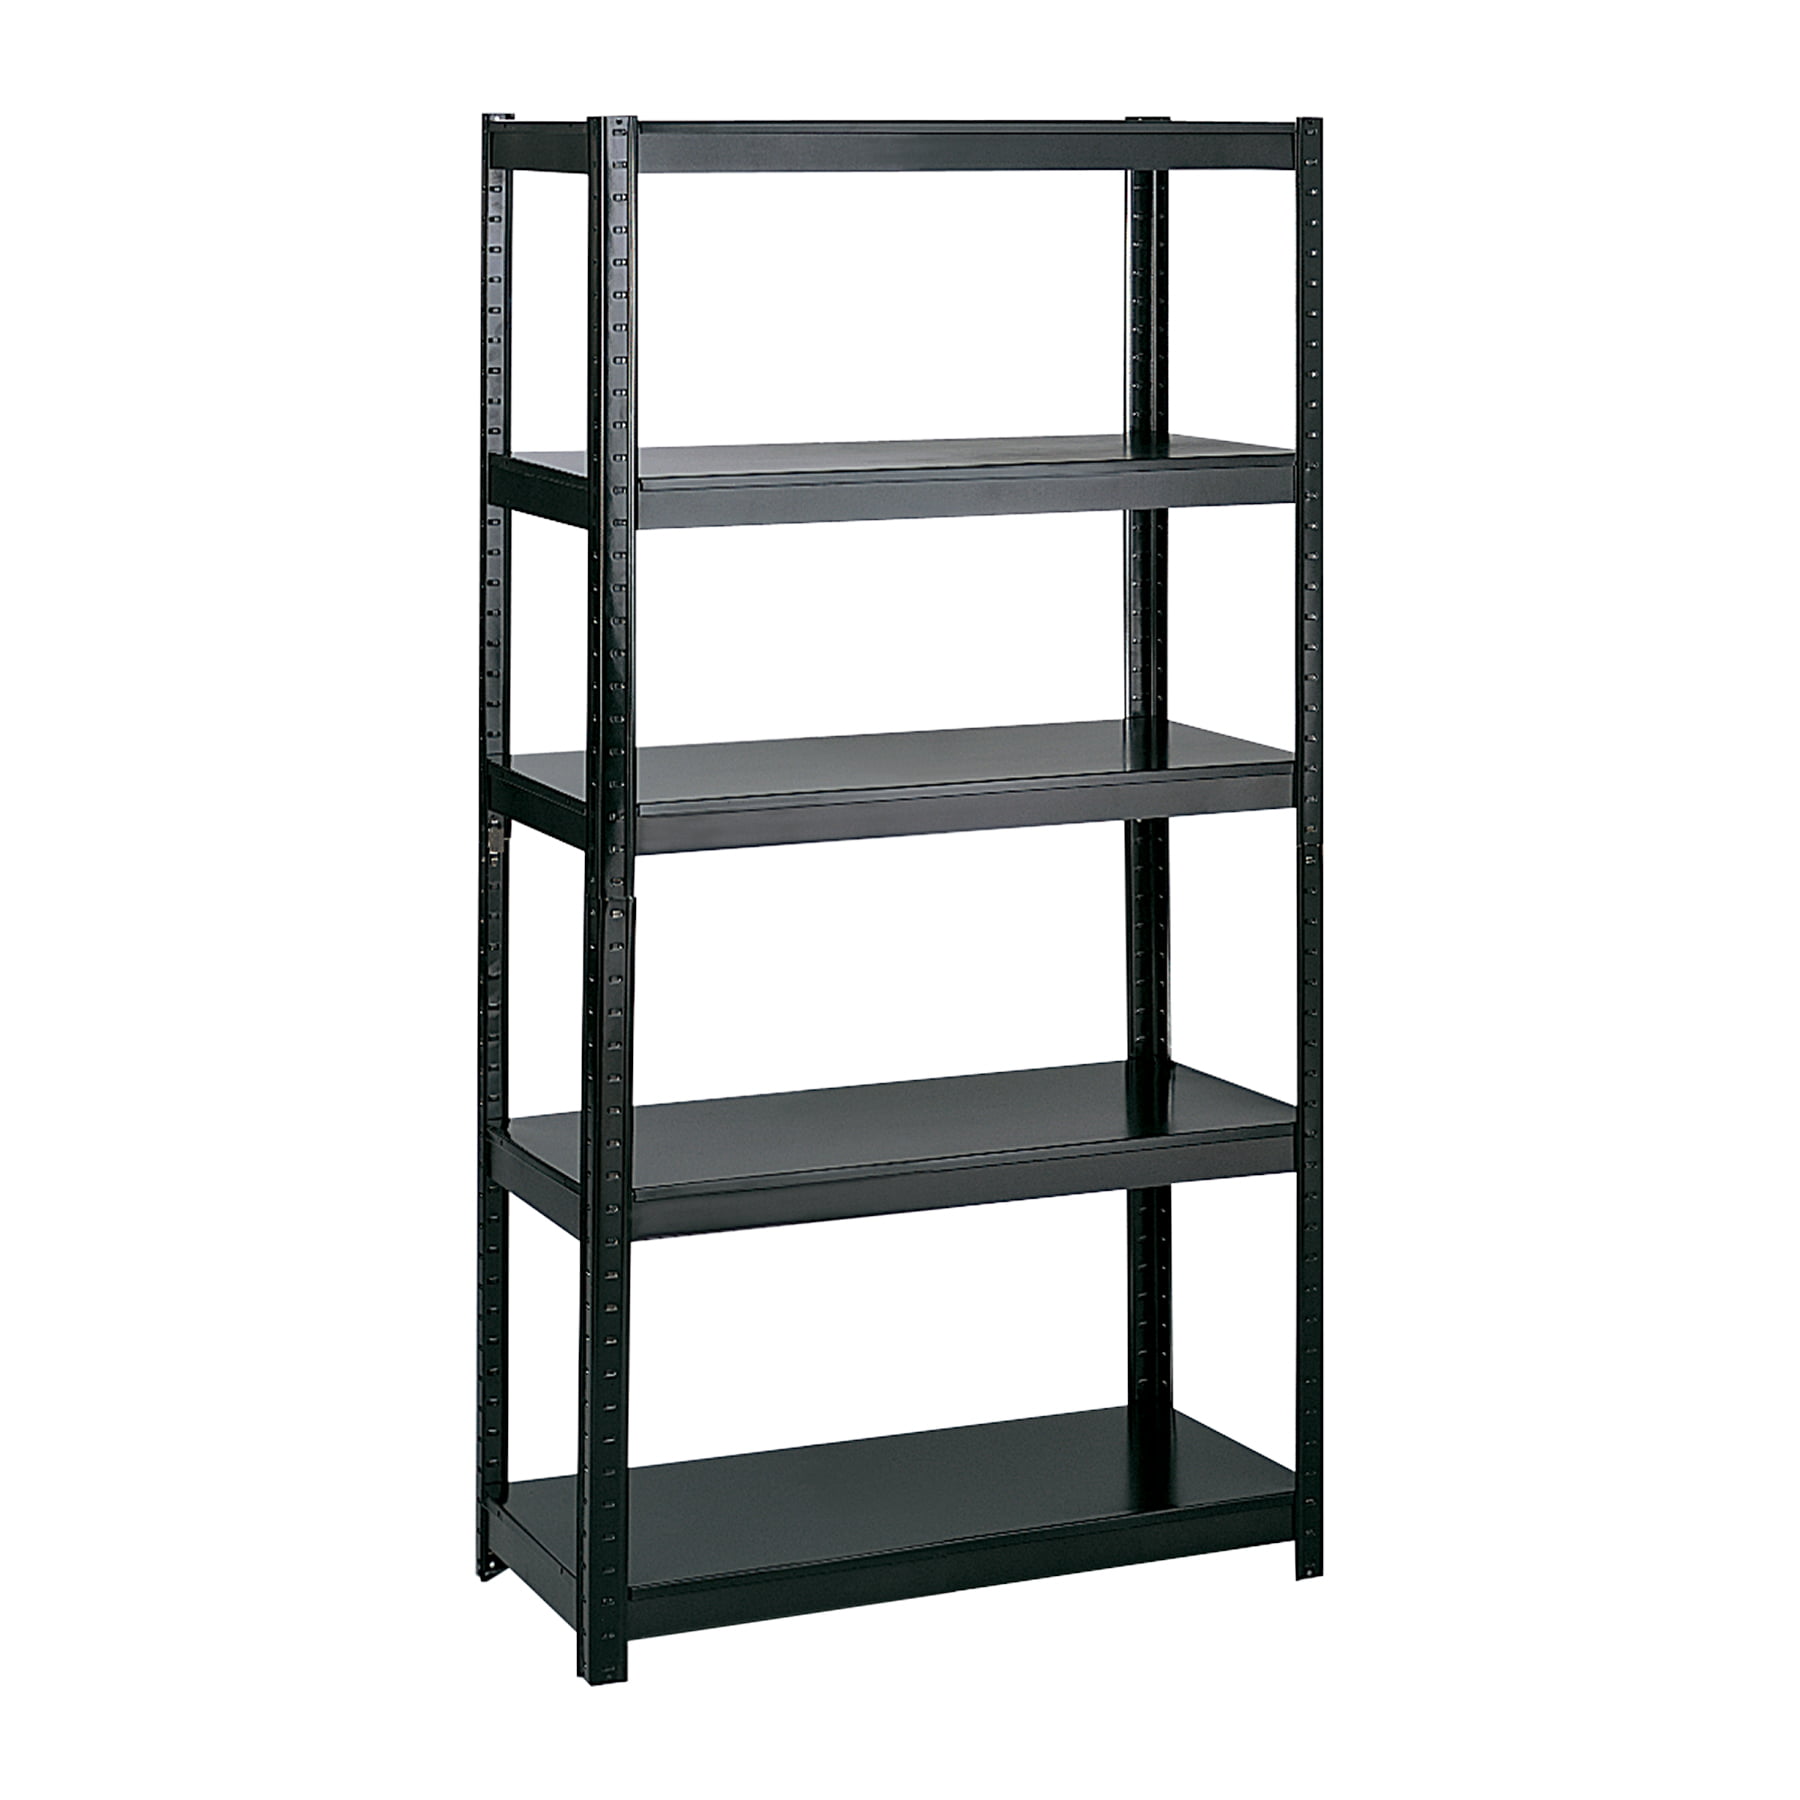 24 inch wide shelving